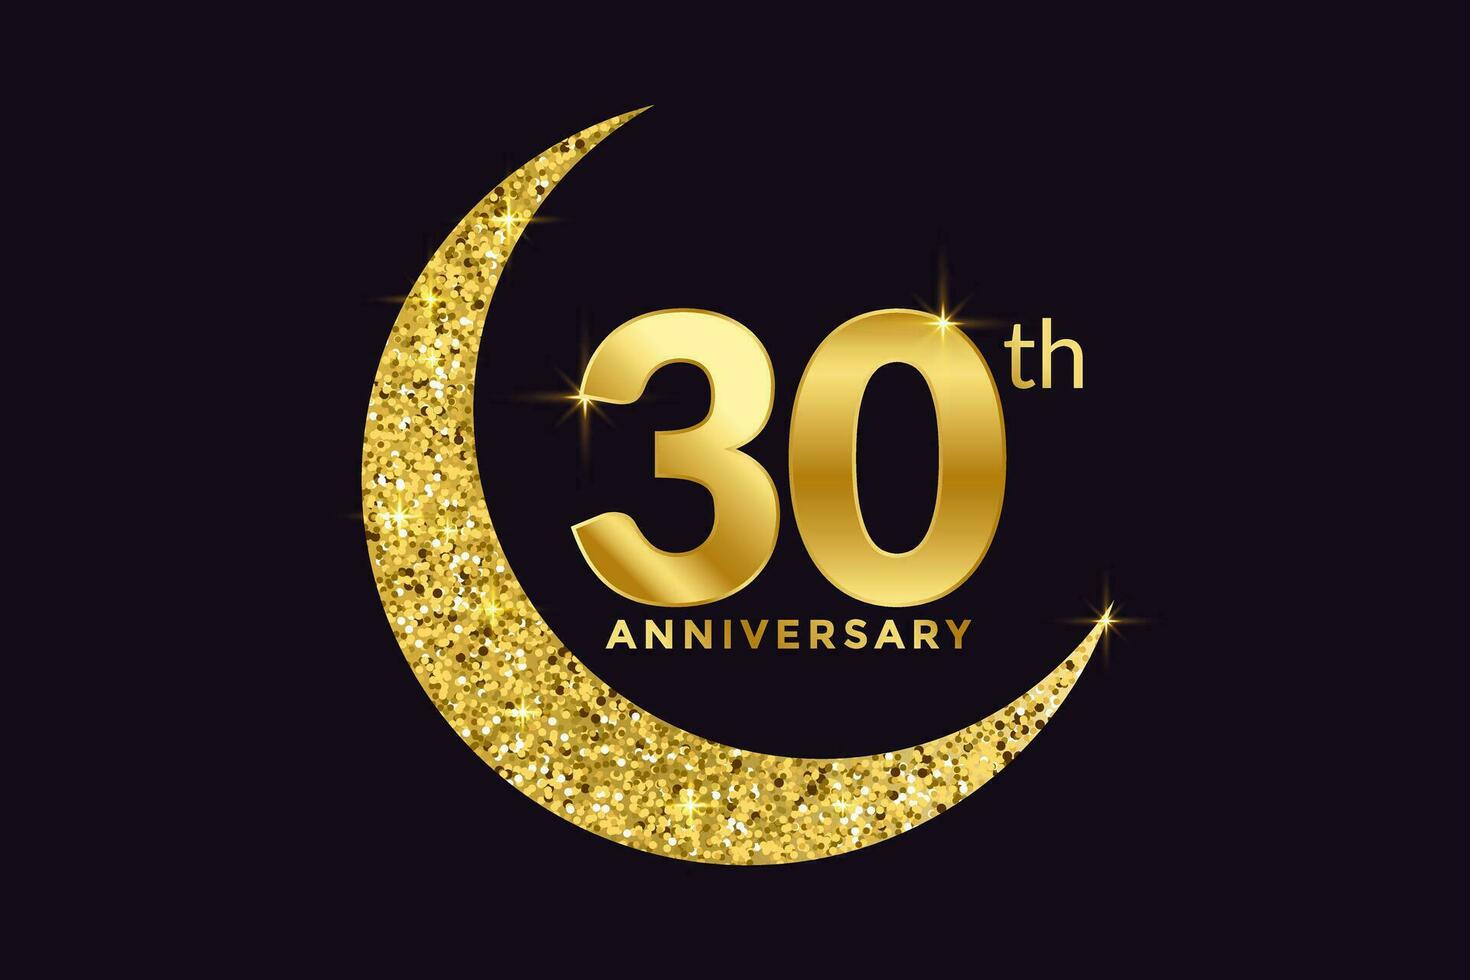 Thirty Years Anniversary Celebration Golden Emblem in Black Background. Number 30 Luxury Style Banner Isolated Vector